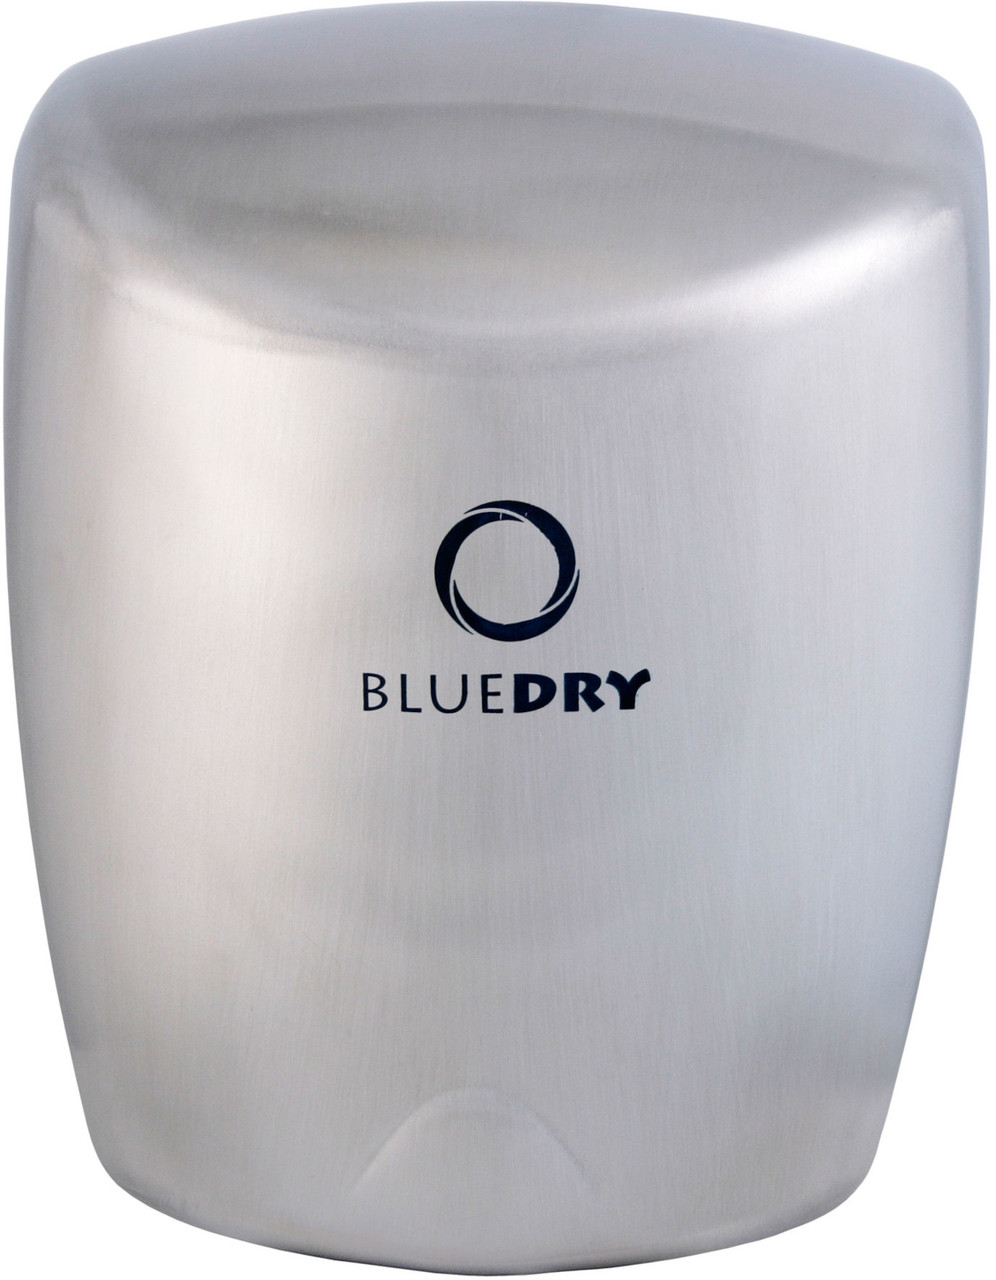 HD-BD1015BS - BlueDry Mini Jet Hand Dryer - Brushed Stainless Steel - Front